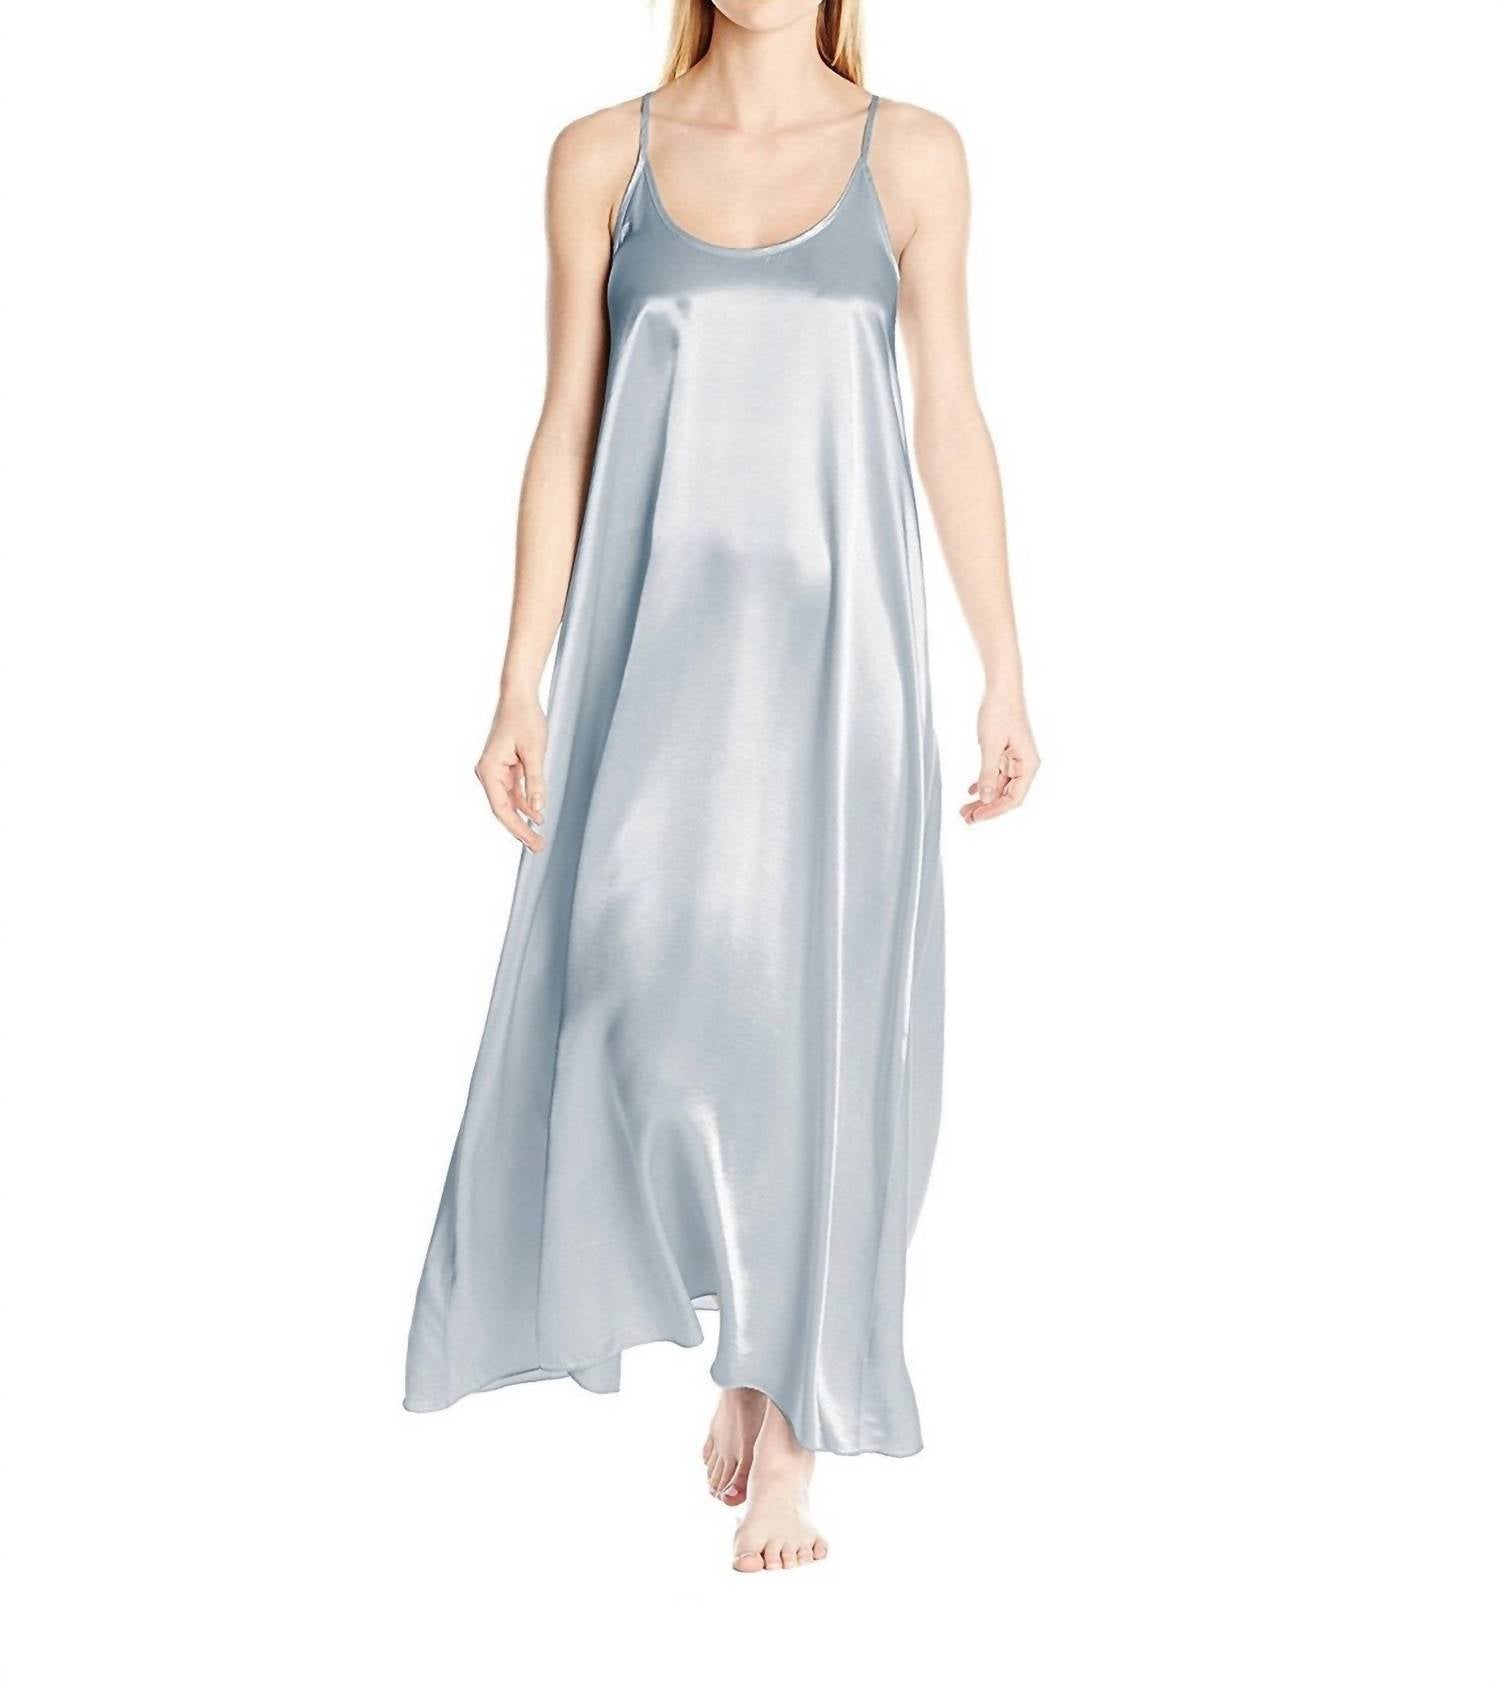 Pj Harlow - Monrow Satin Long Nightgown With Gathered Back